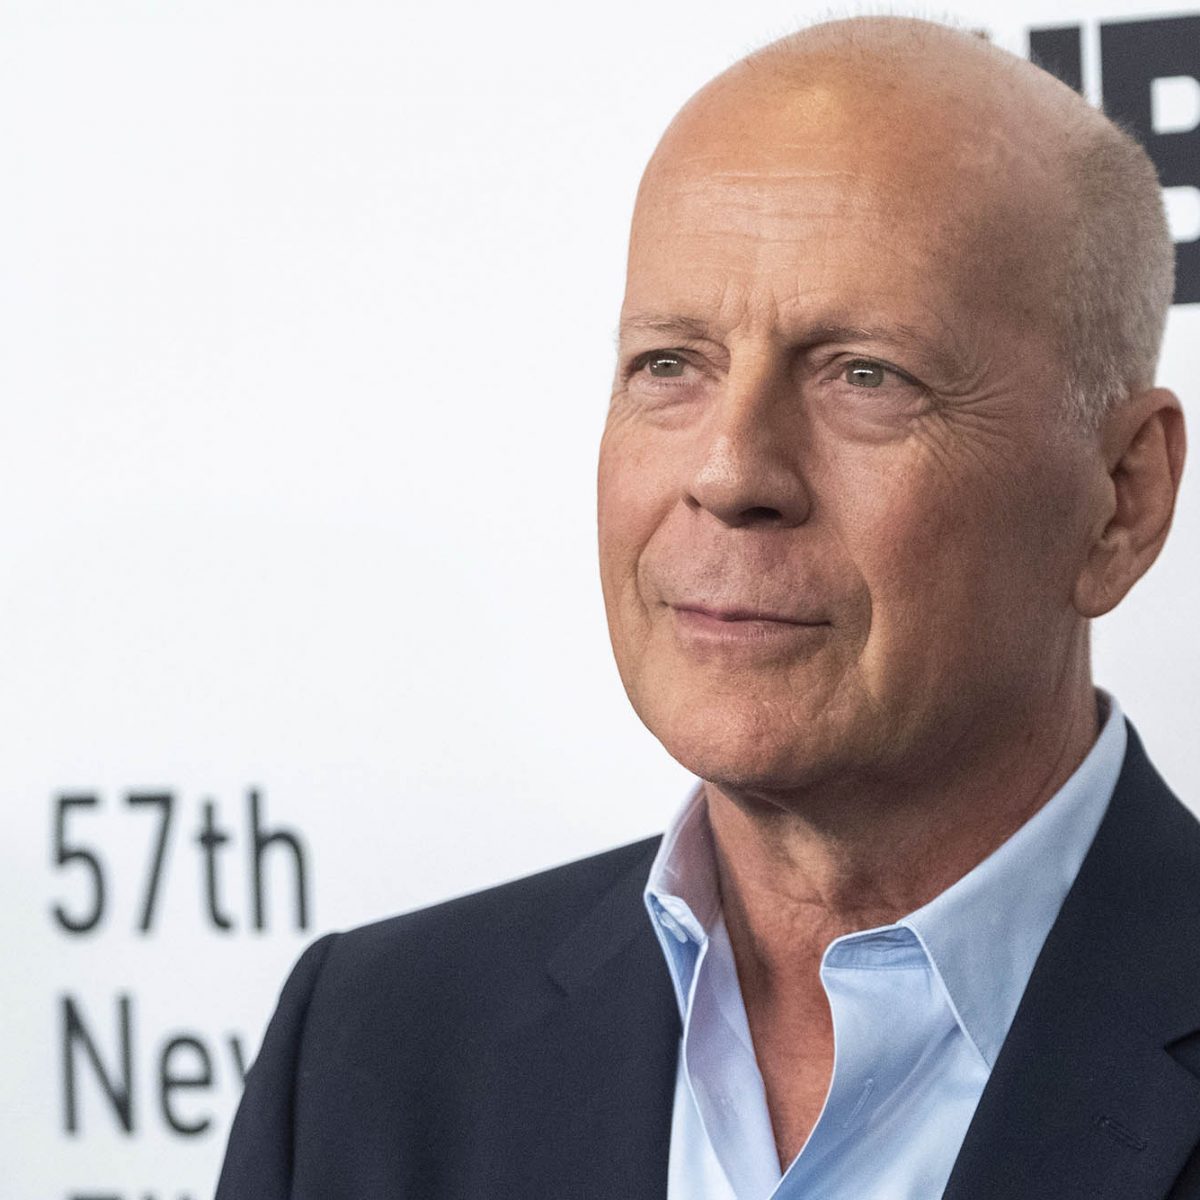 What Now for Bruce Willis after Actors Recent Dementia Diagnosis? The Brink Boston University